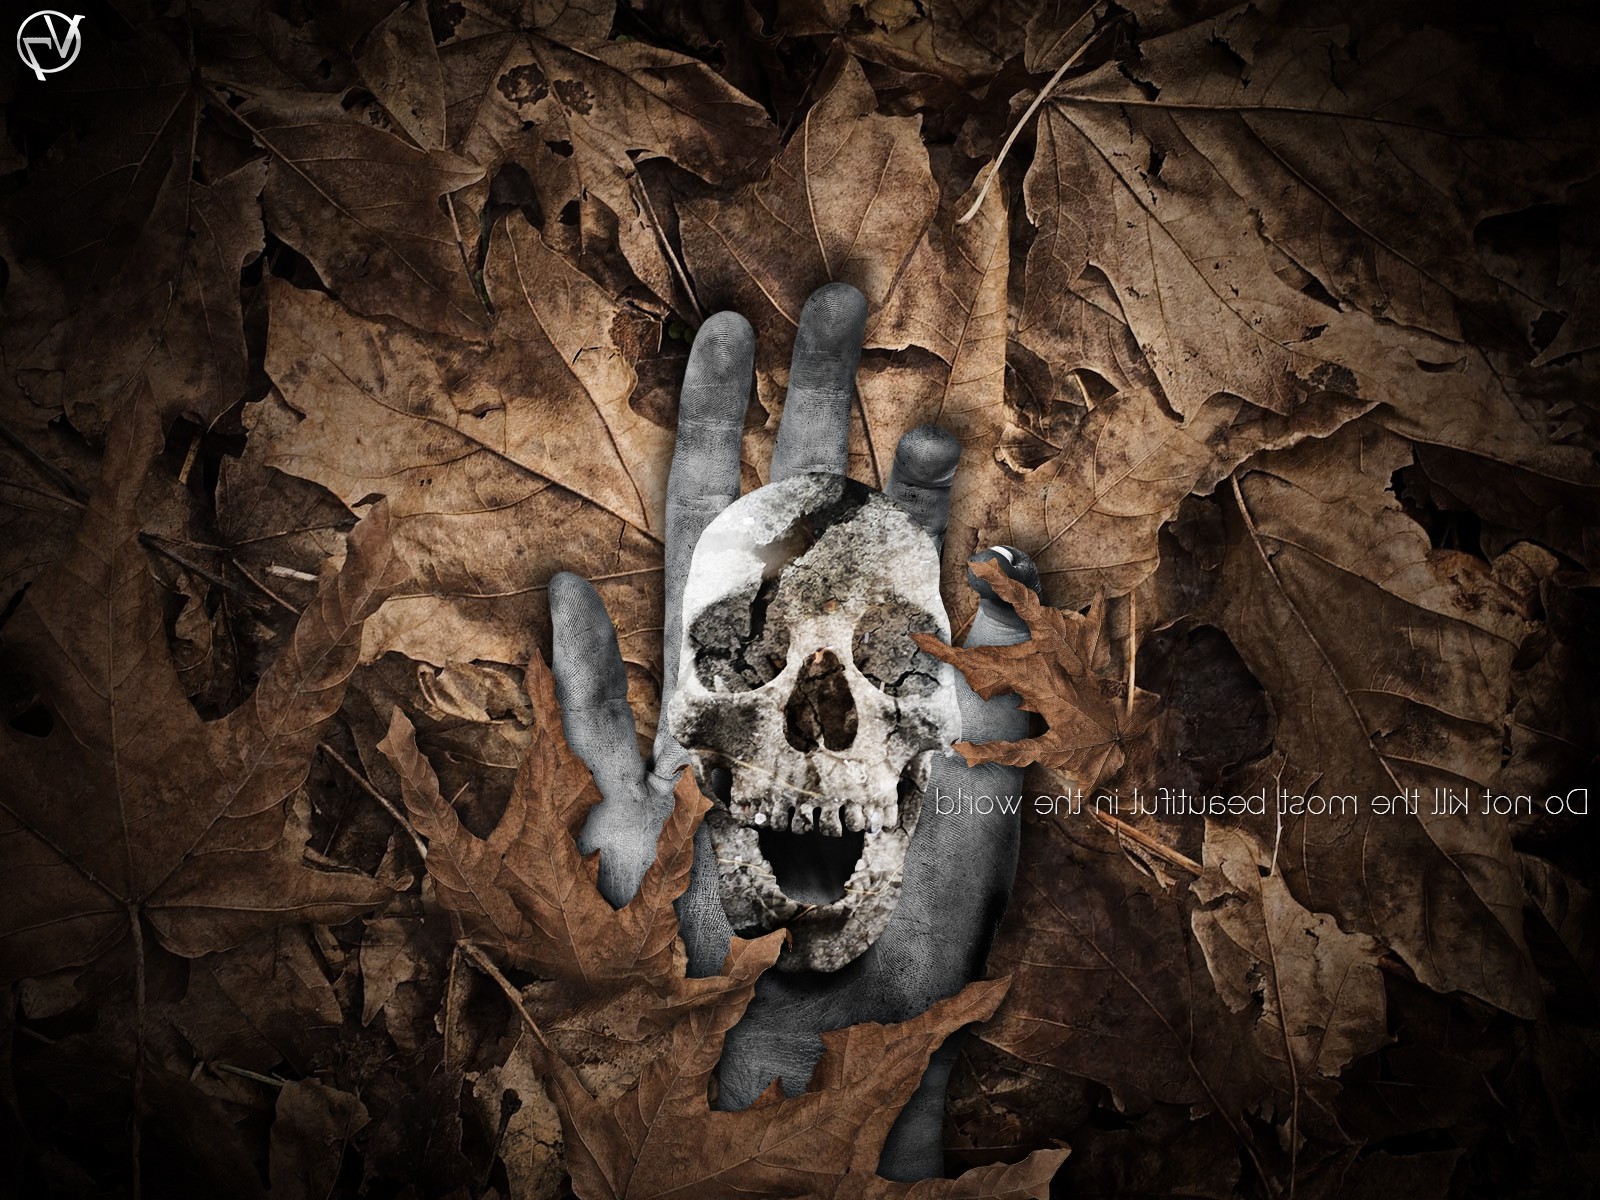 nature, Death, Skull, Leaves, Photo Manipulation, Adobe Photoshop  Wallpapers HD / Desktop and Mobile Backgrounds